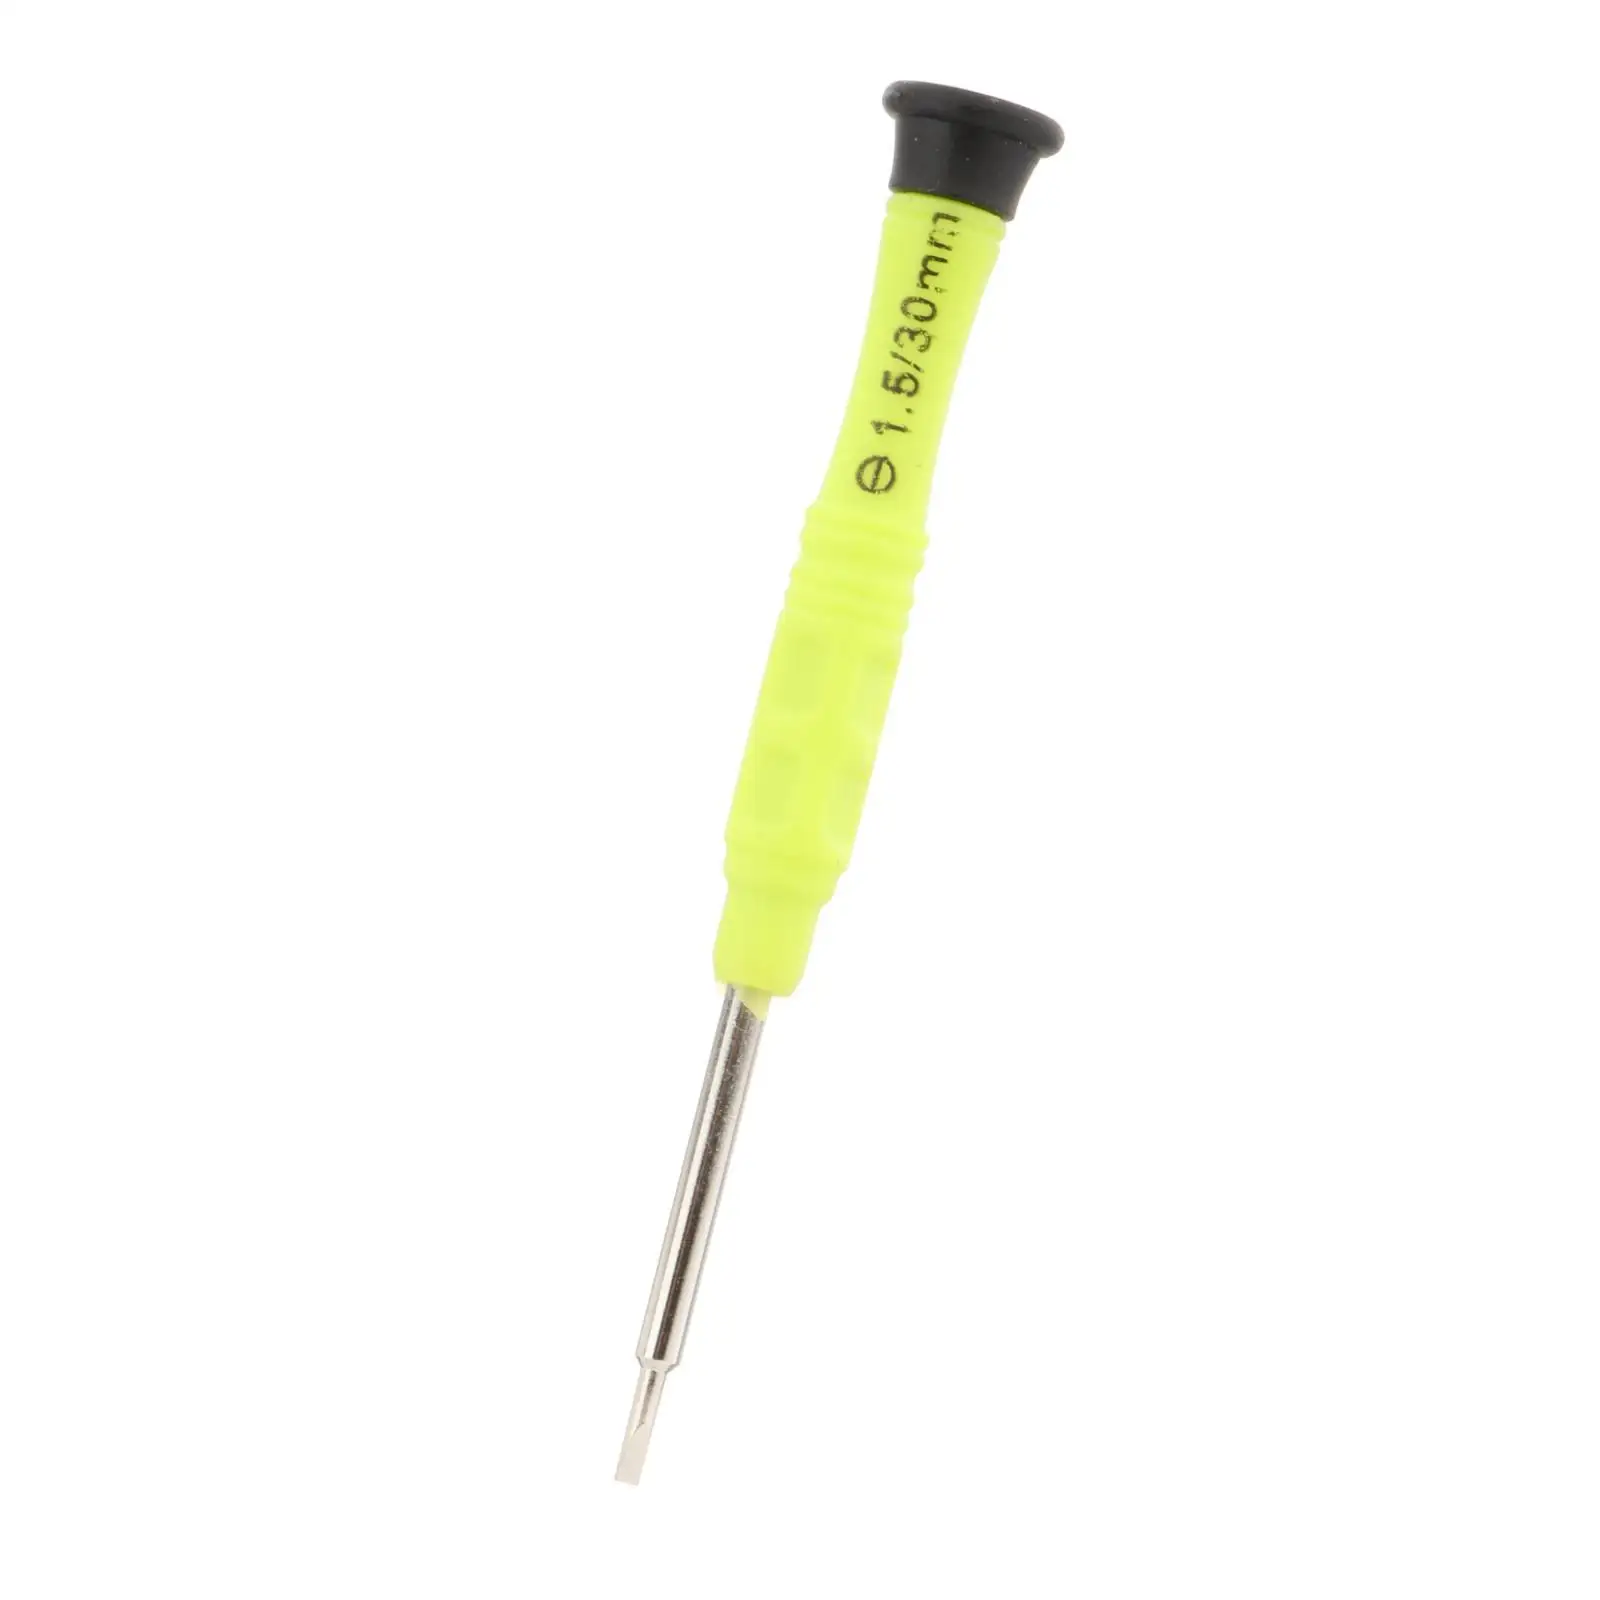 Fencing Screwdriver Professional Hand Tools for Competitions Foil Accessory